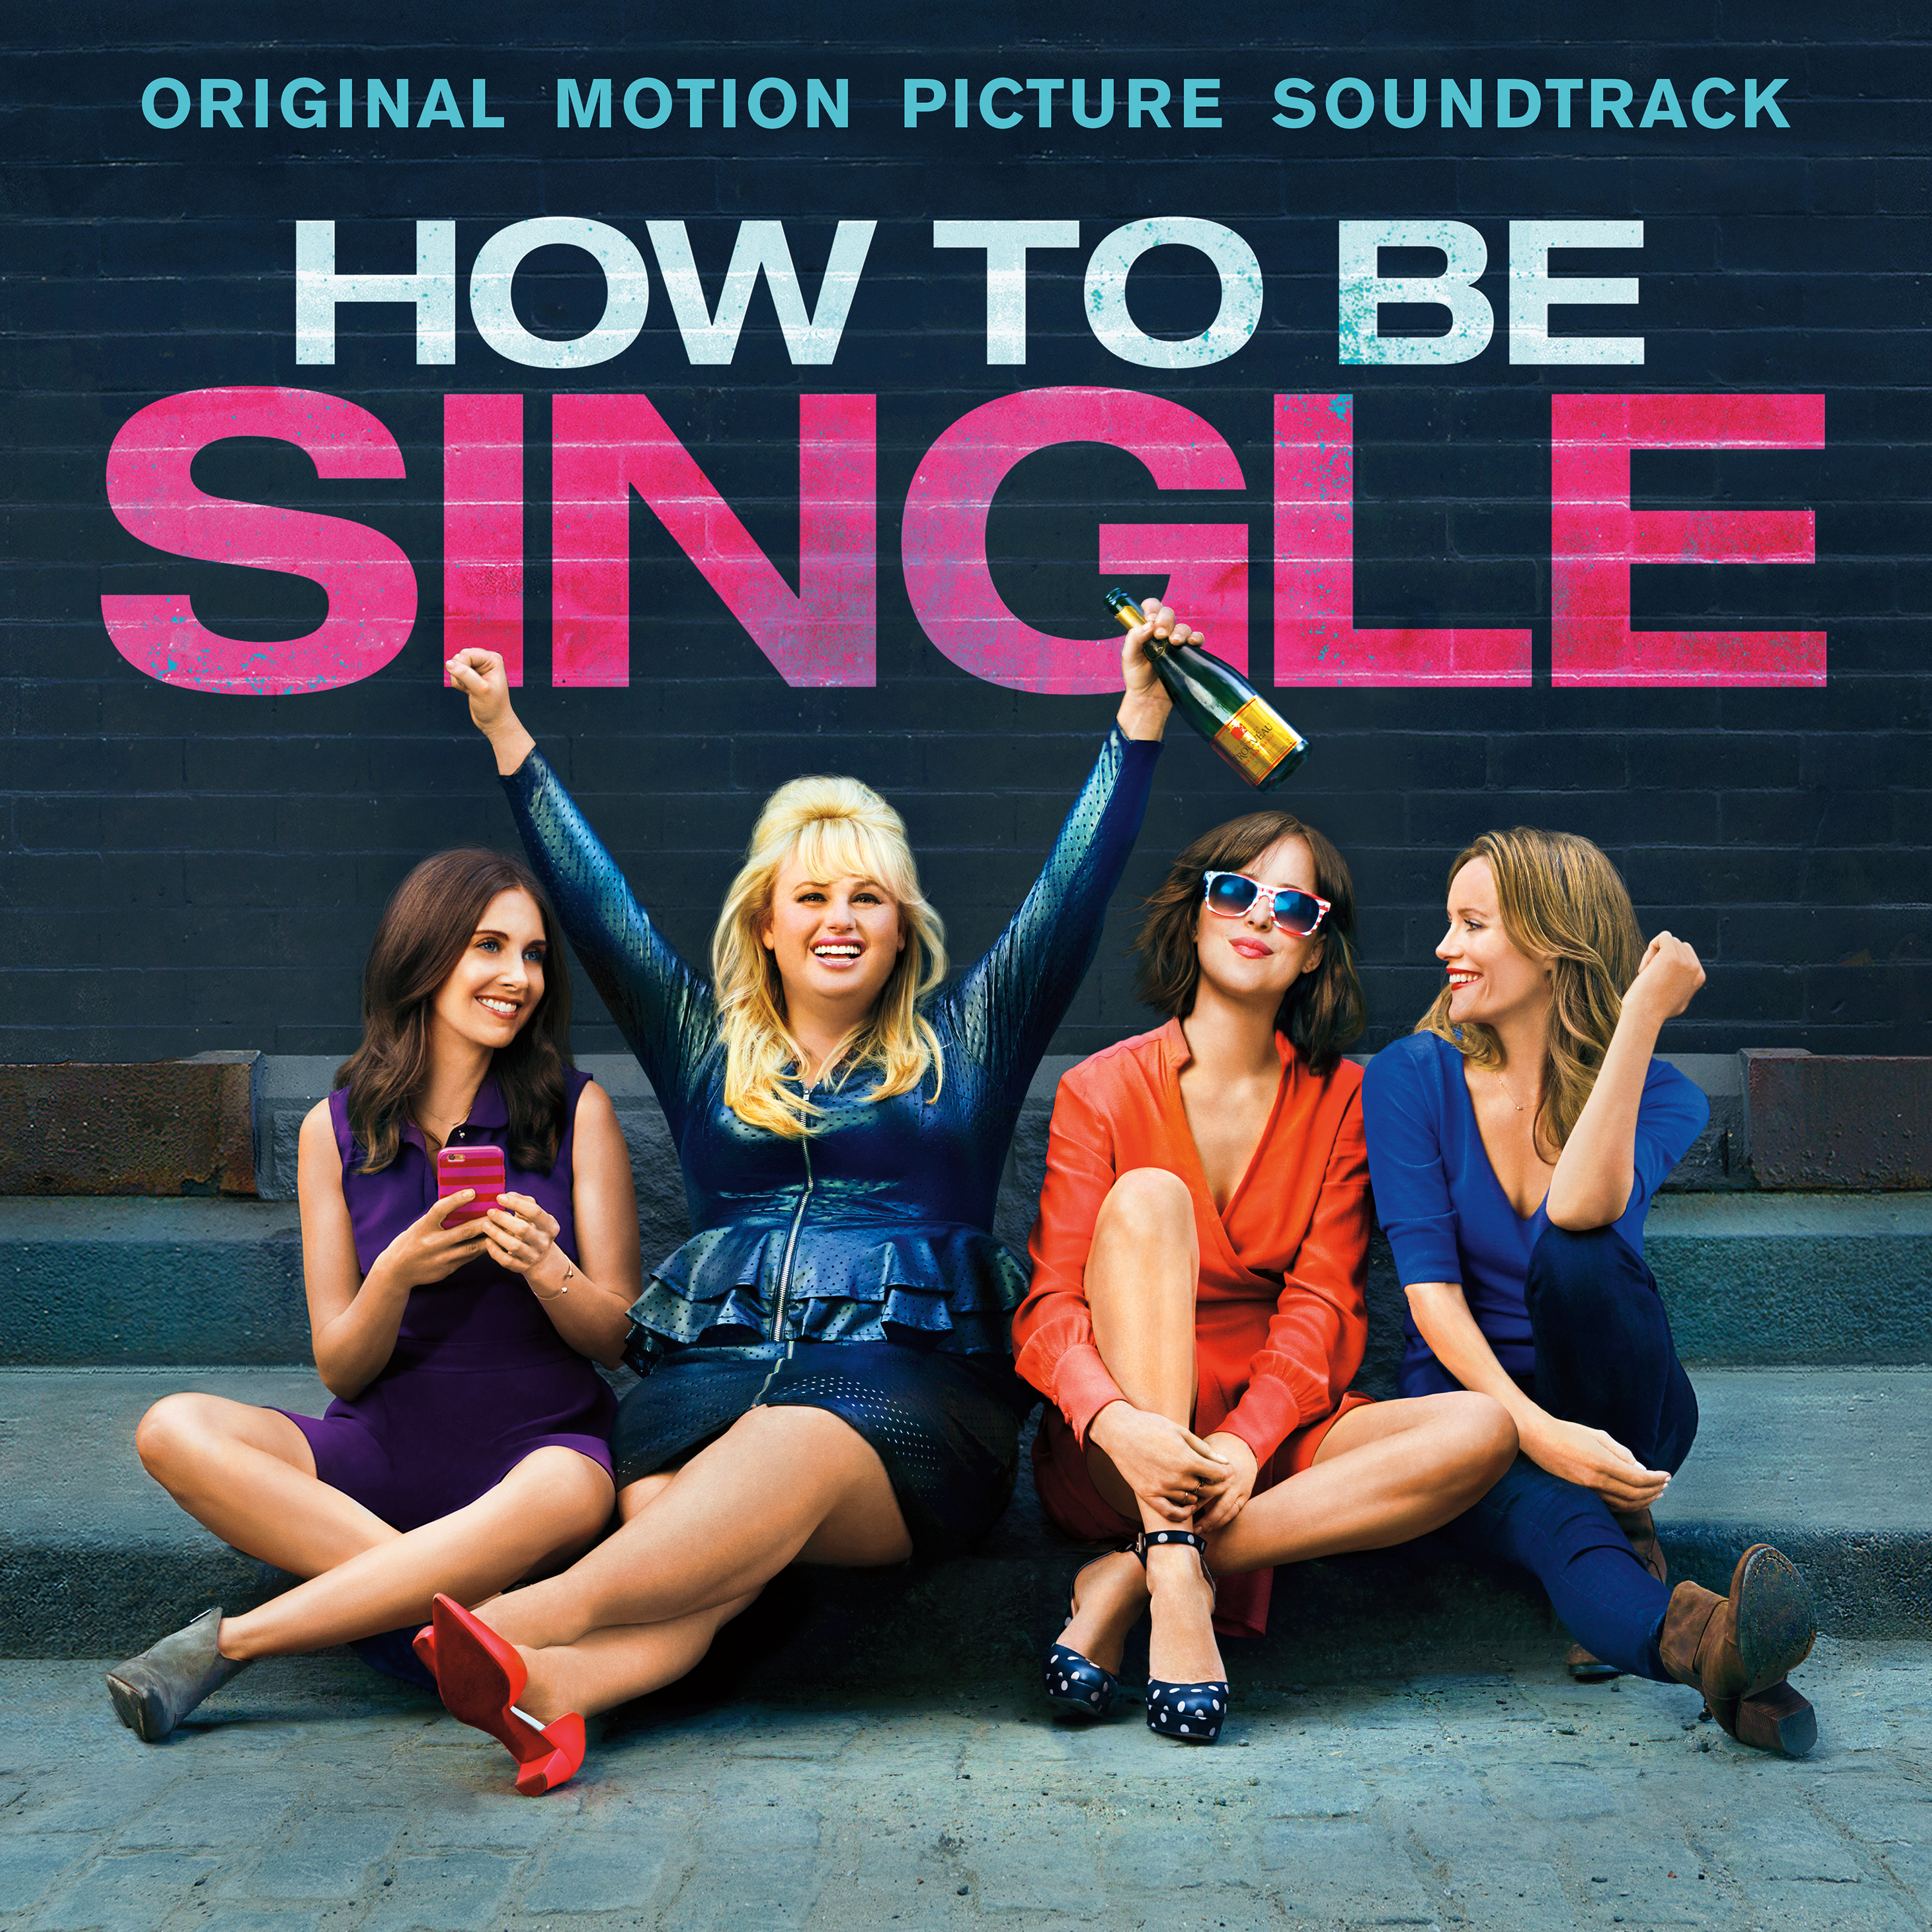 How To Be Single: Original Motion Picture Soundtrack